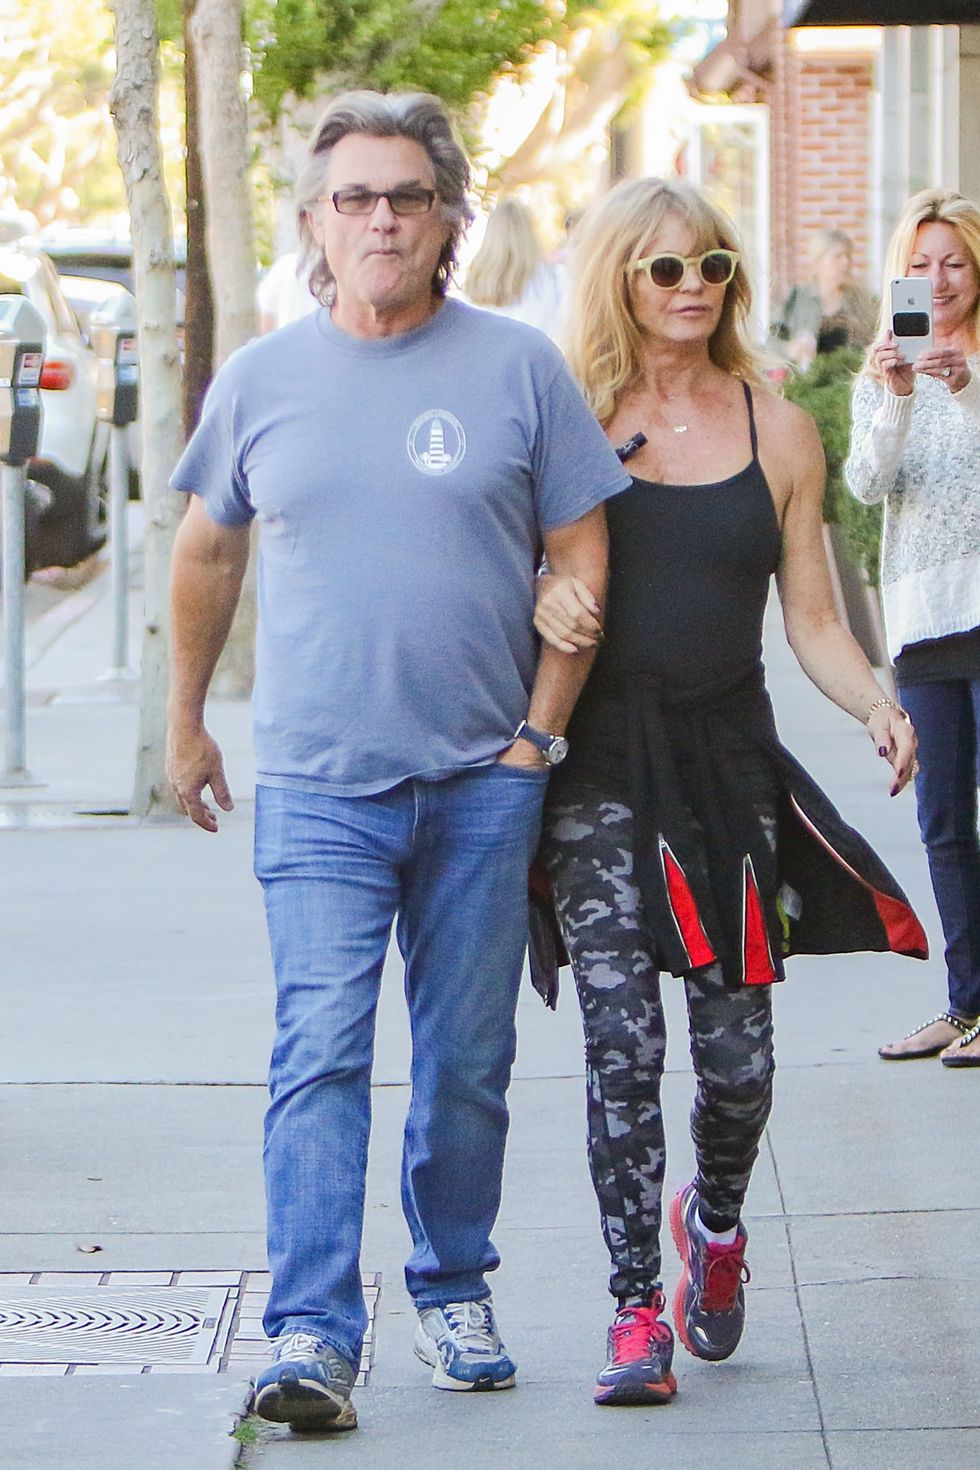 Goldie Hawn And Kurt Russell's Body Language, Per An Expert